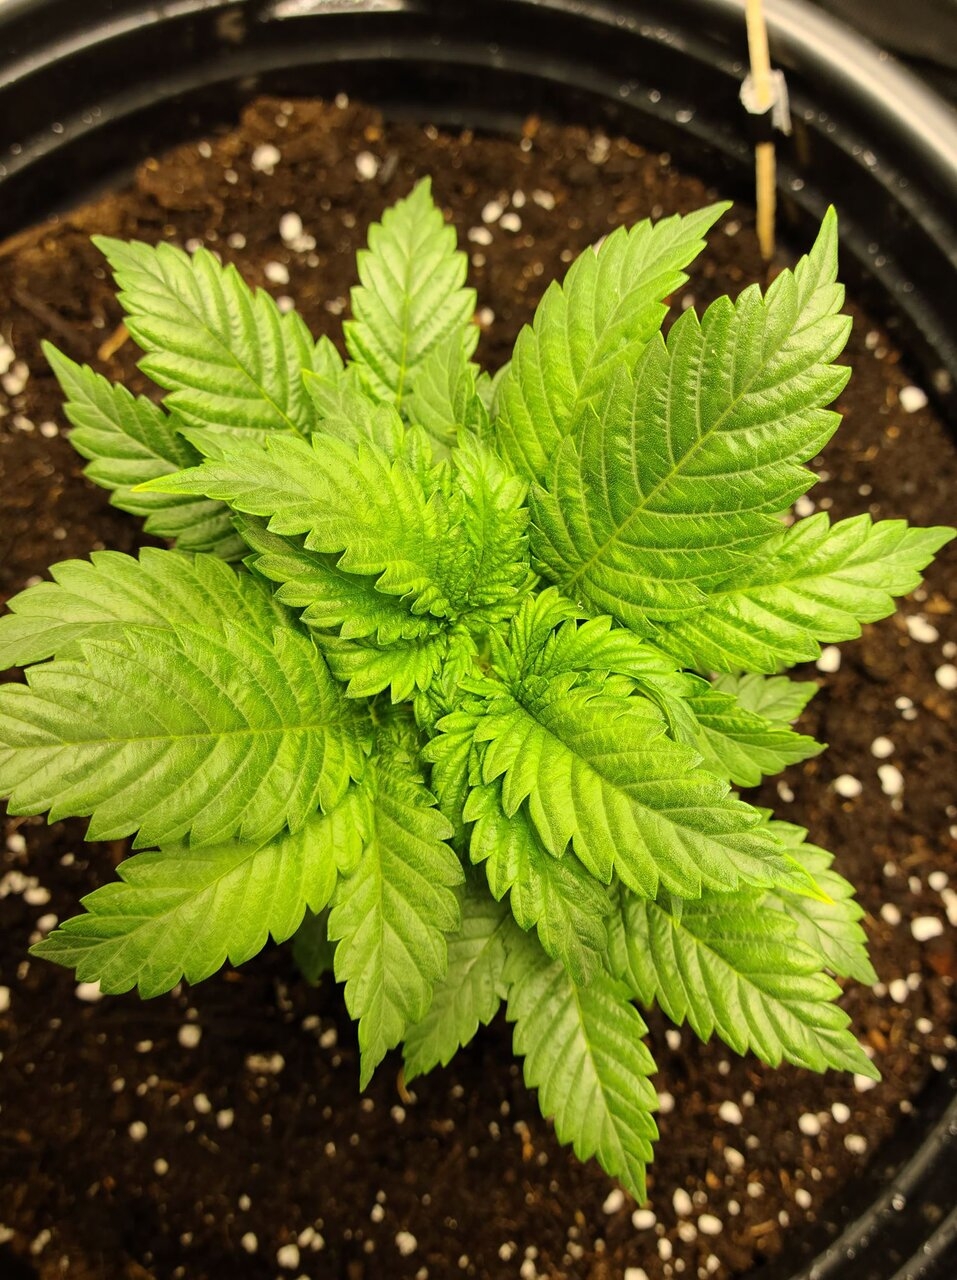 June 15th 2020 - 48 hours after topping 2